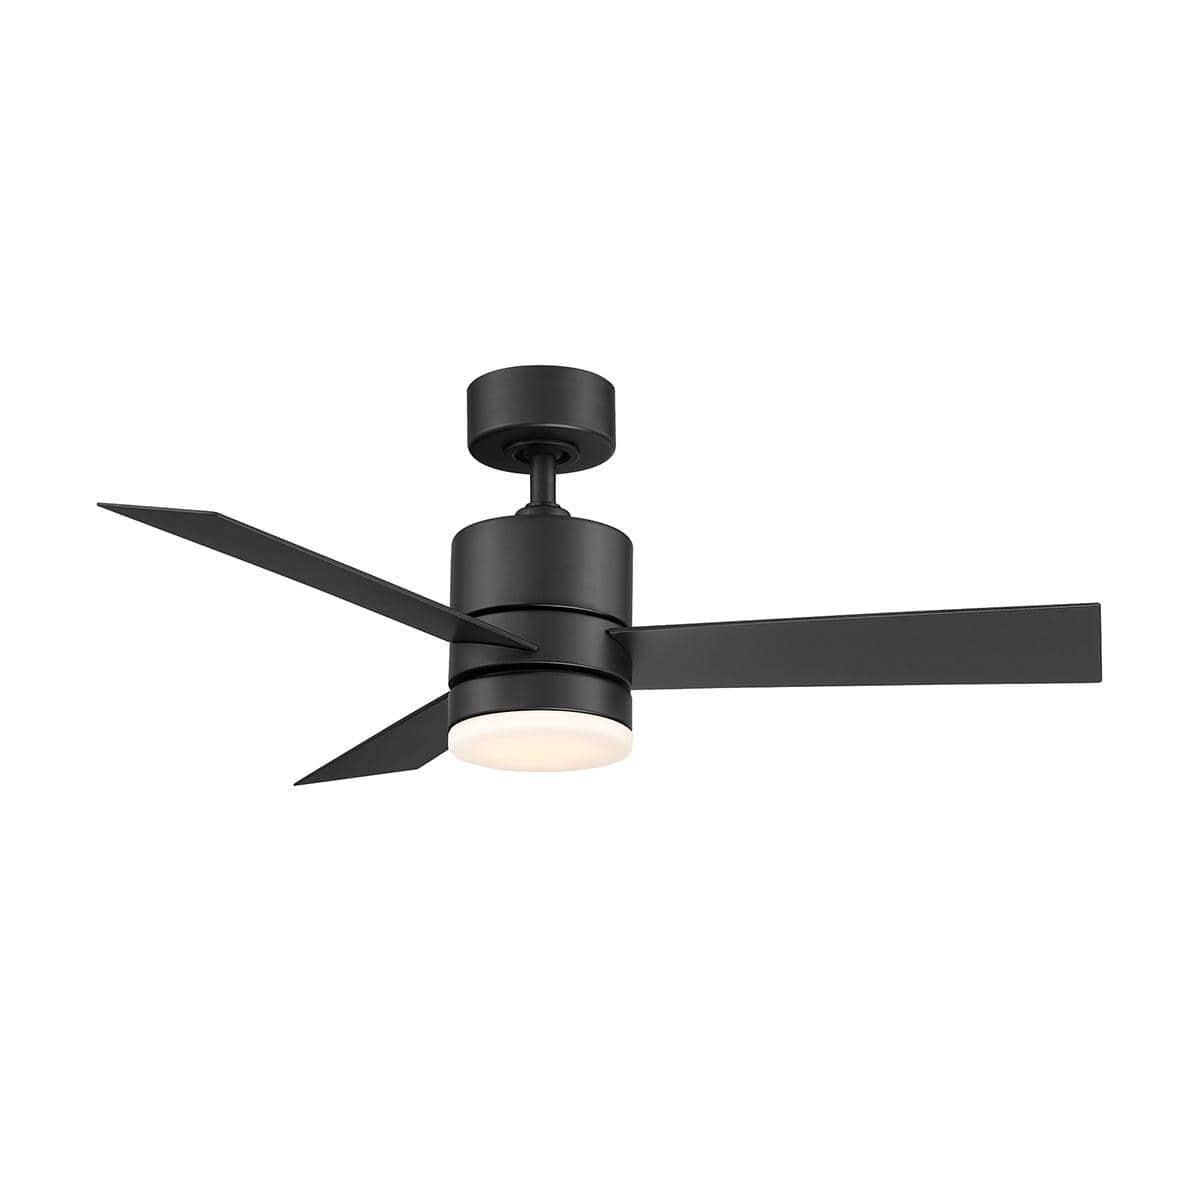 Modern Forms - Axis Ceiling Fan - FR-W1803-44L-35-MB | Montreal Lighting & Hardware